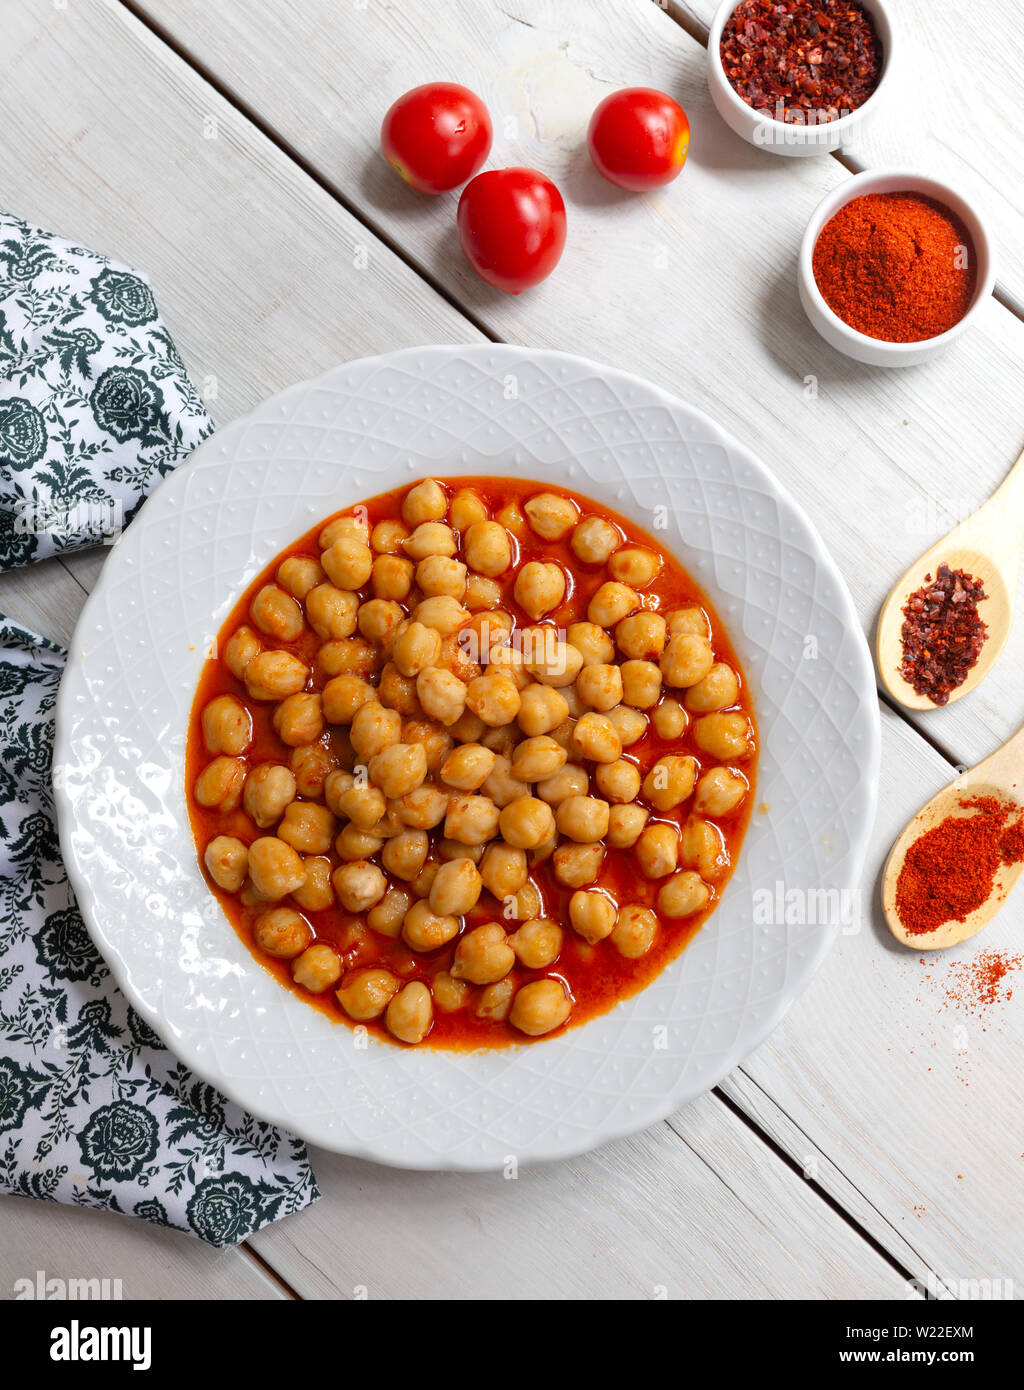 Vegetarian tasty spicy chick pea soup on a wooden background / Cheakpea stew/ Turkish nohut pilaki Stock Photo